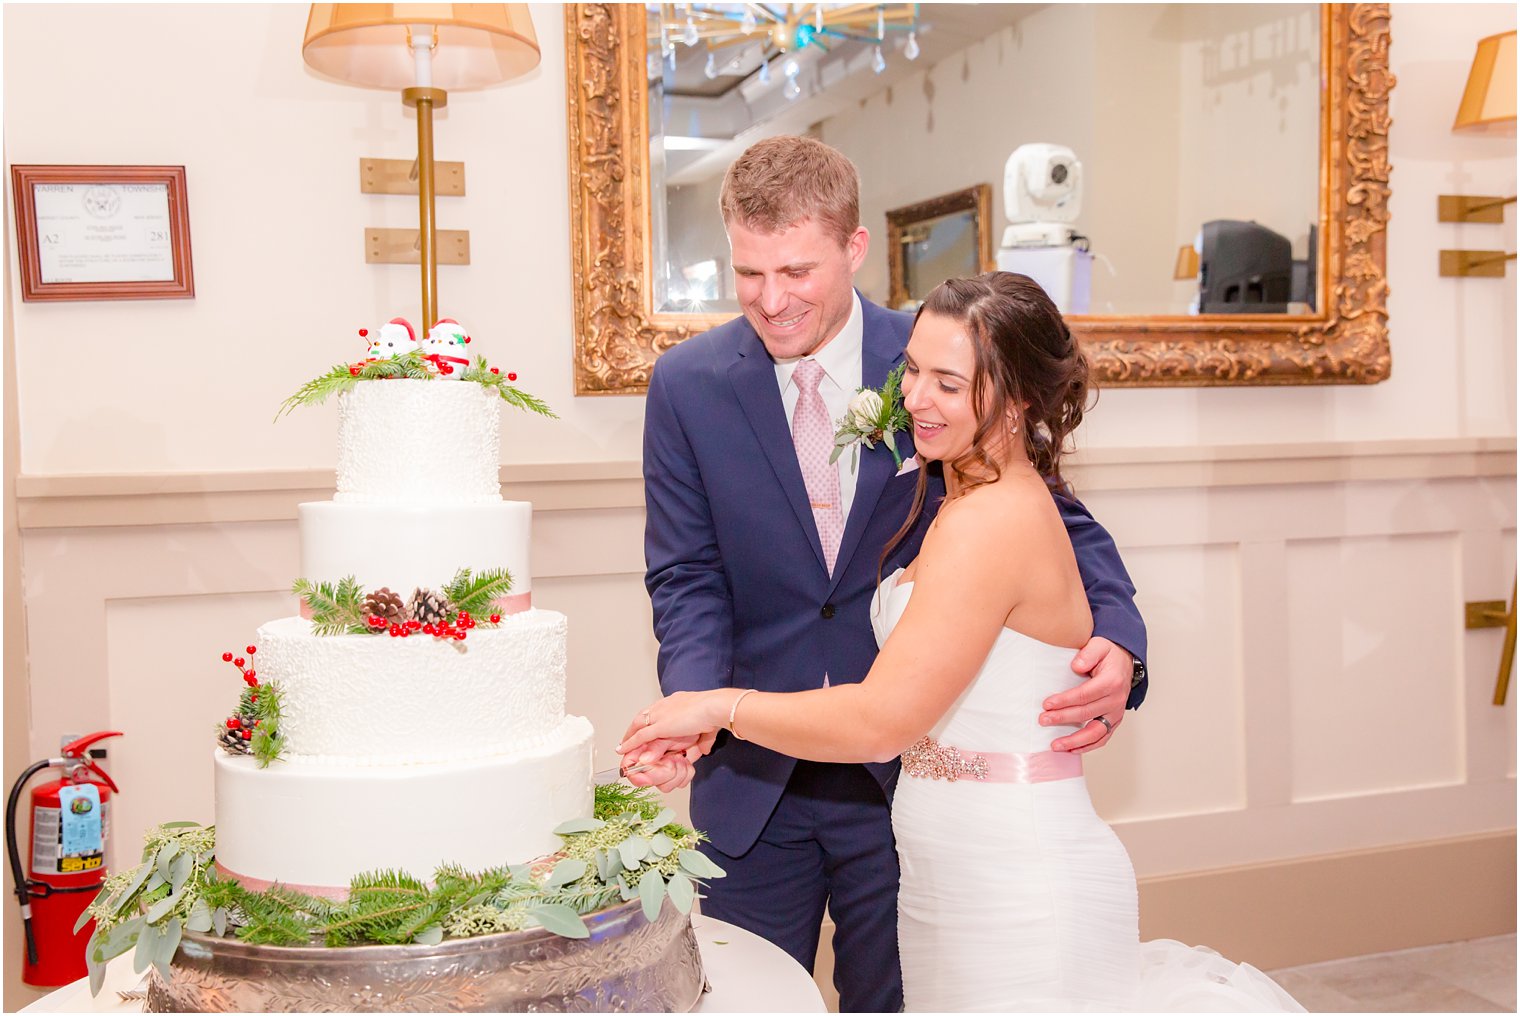 Bride and groom cutting their cake at Stone House at Stirling Ridge in Warren, NJ | Encore Entertainment